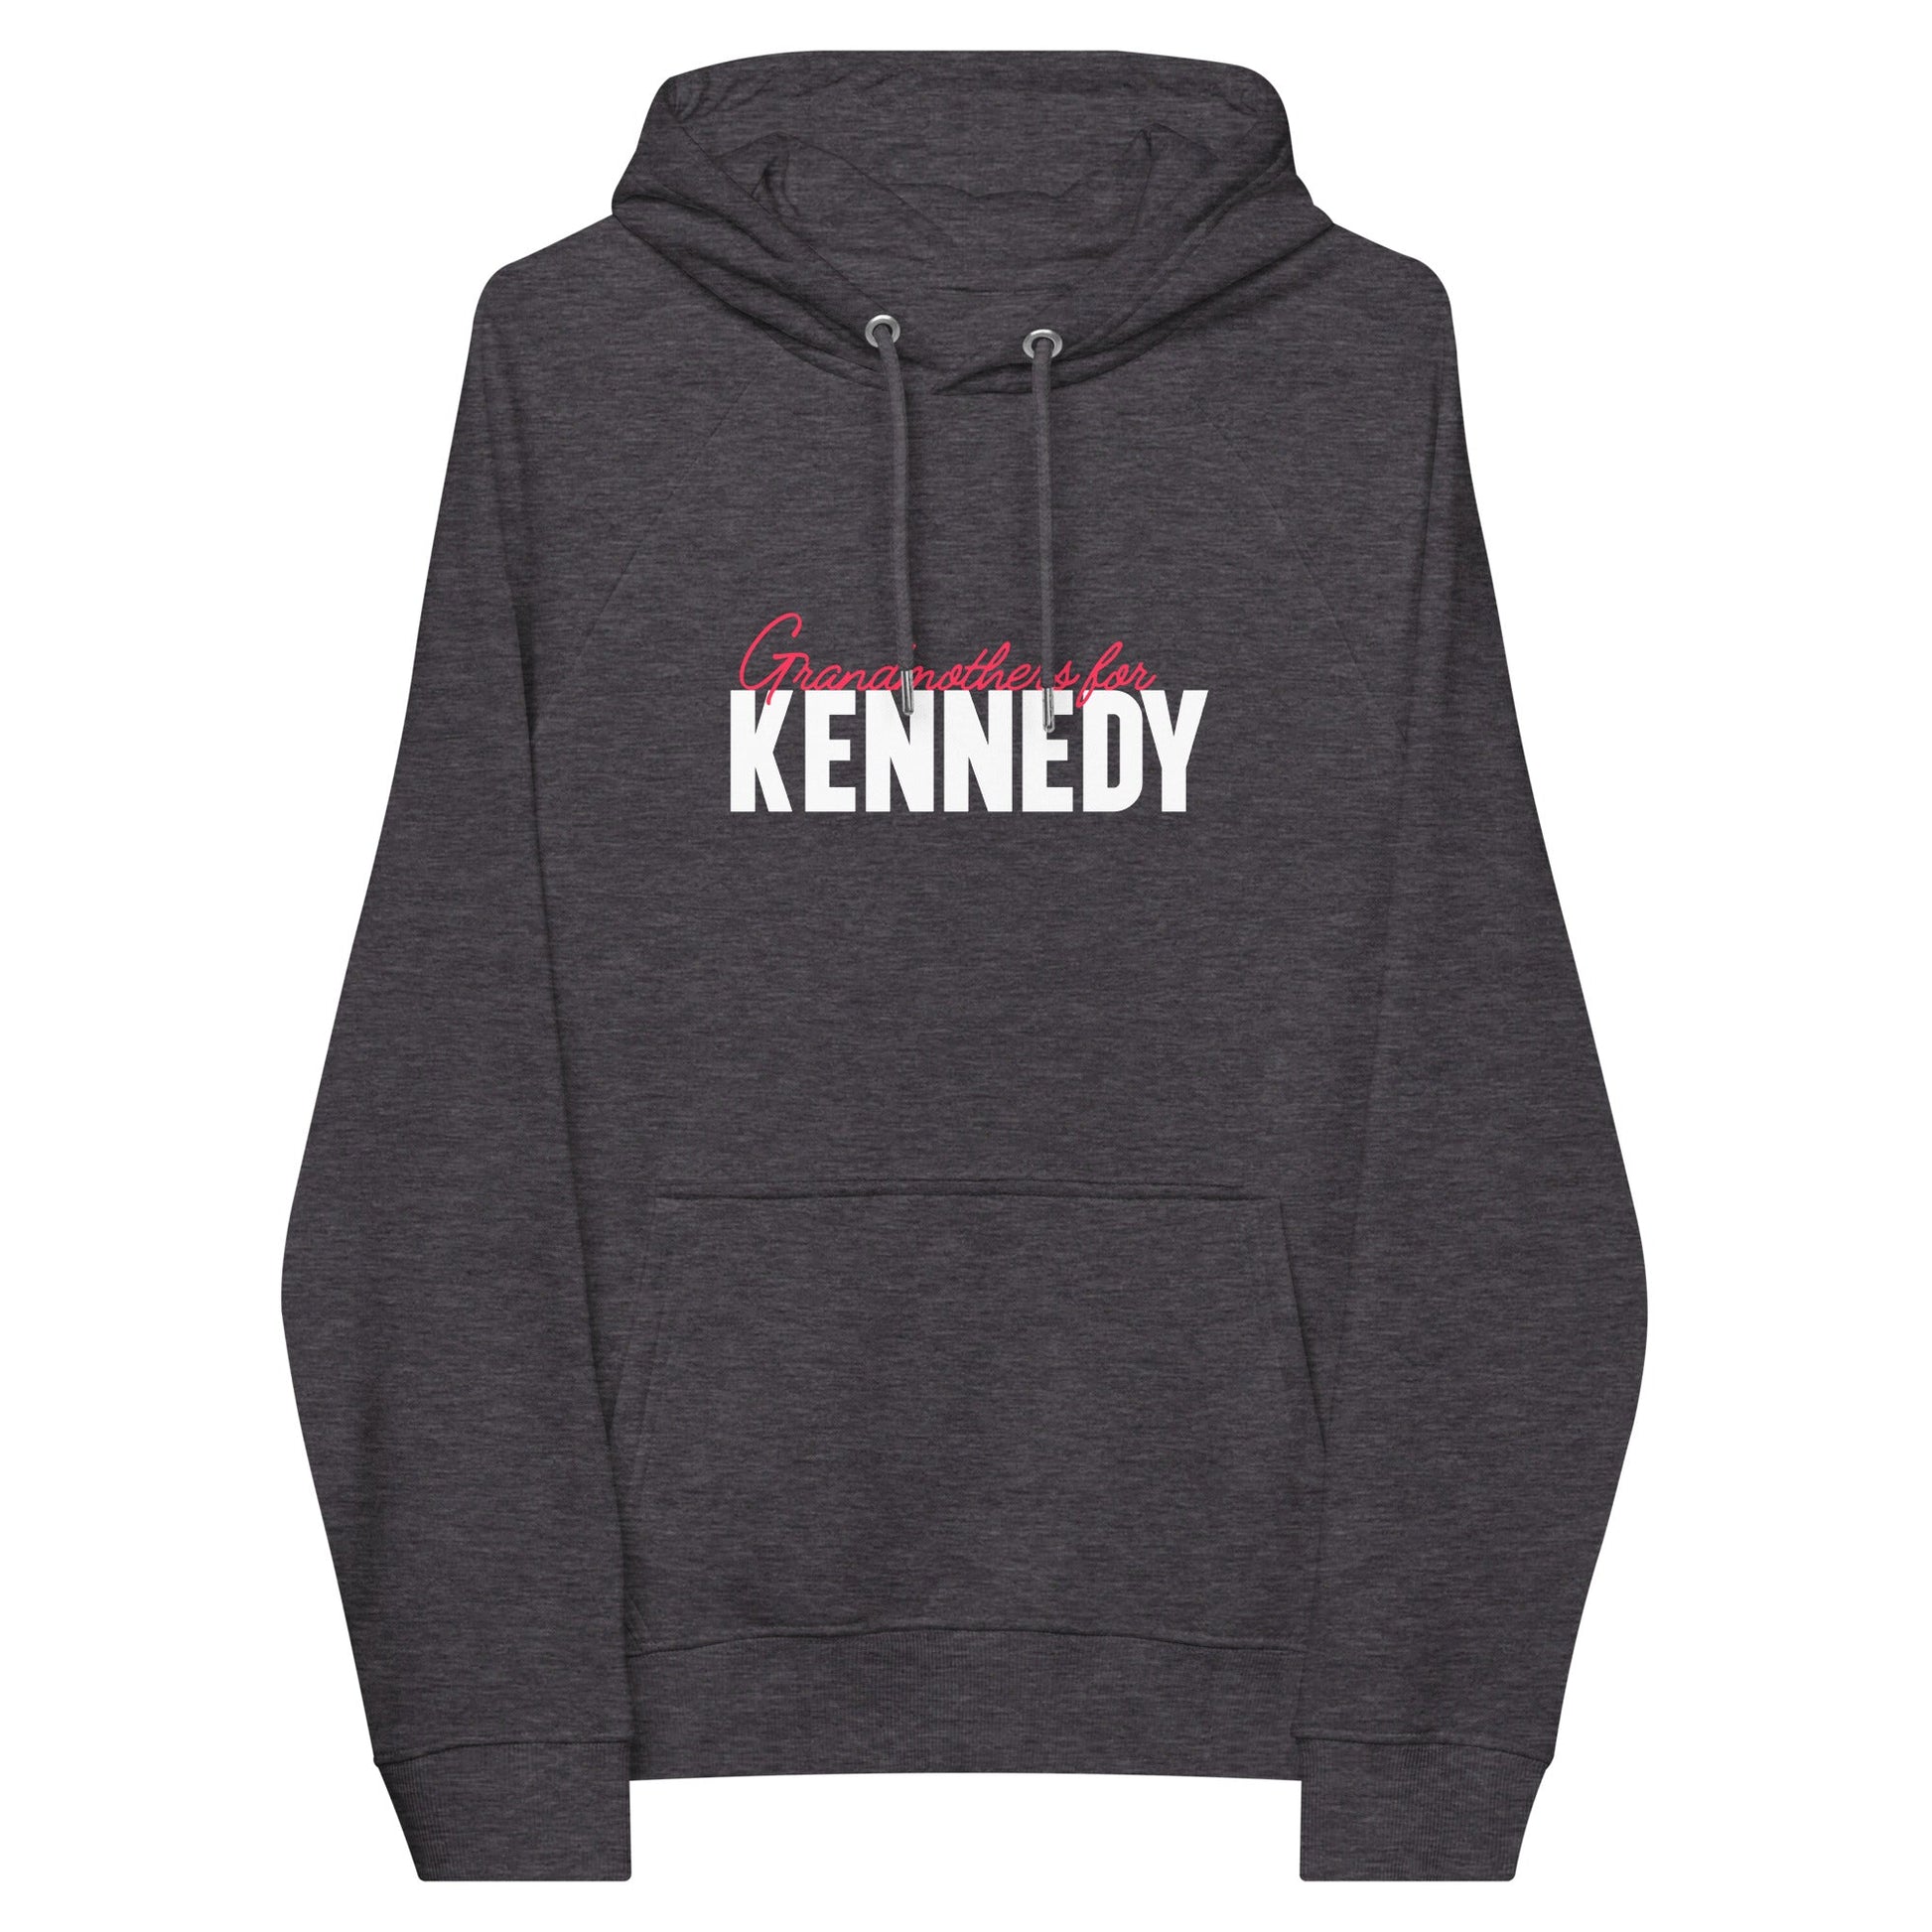 Grandmothers for Kennedy Unisex Hoodie - TEAM KENNEDY. All rights reserved